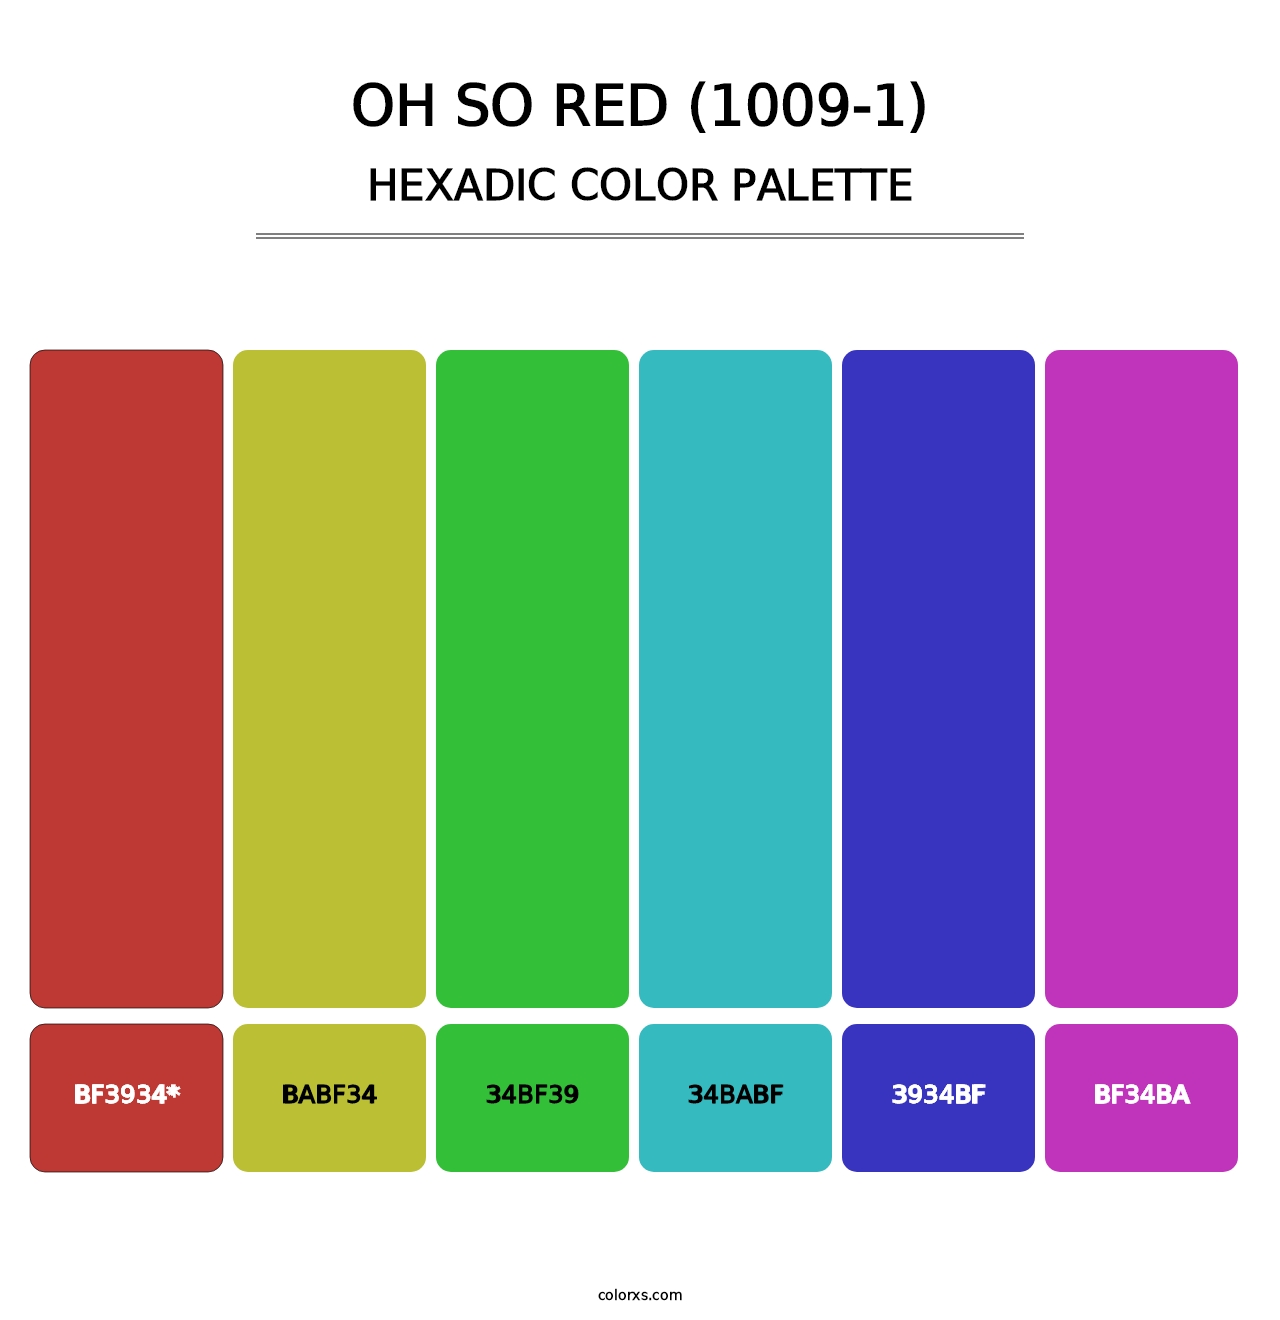 Oh So Red (1009-1) - Hexadic Color Palette